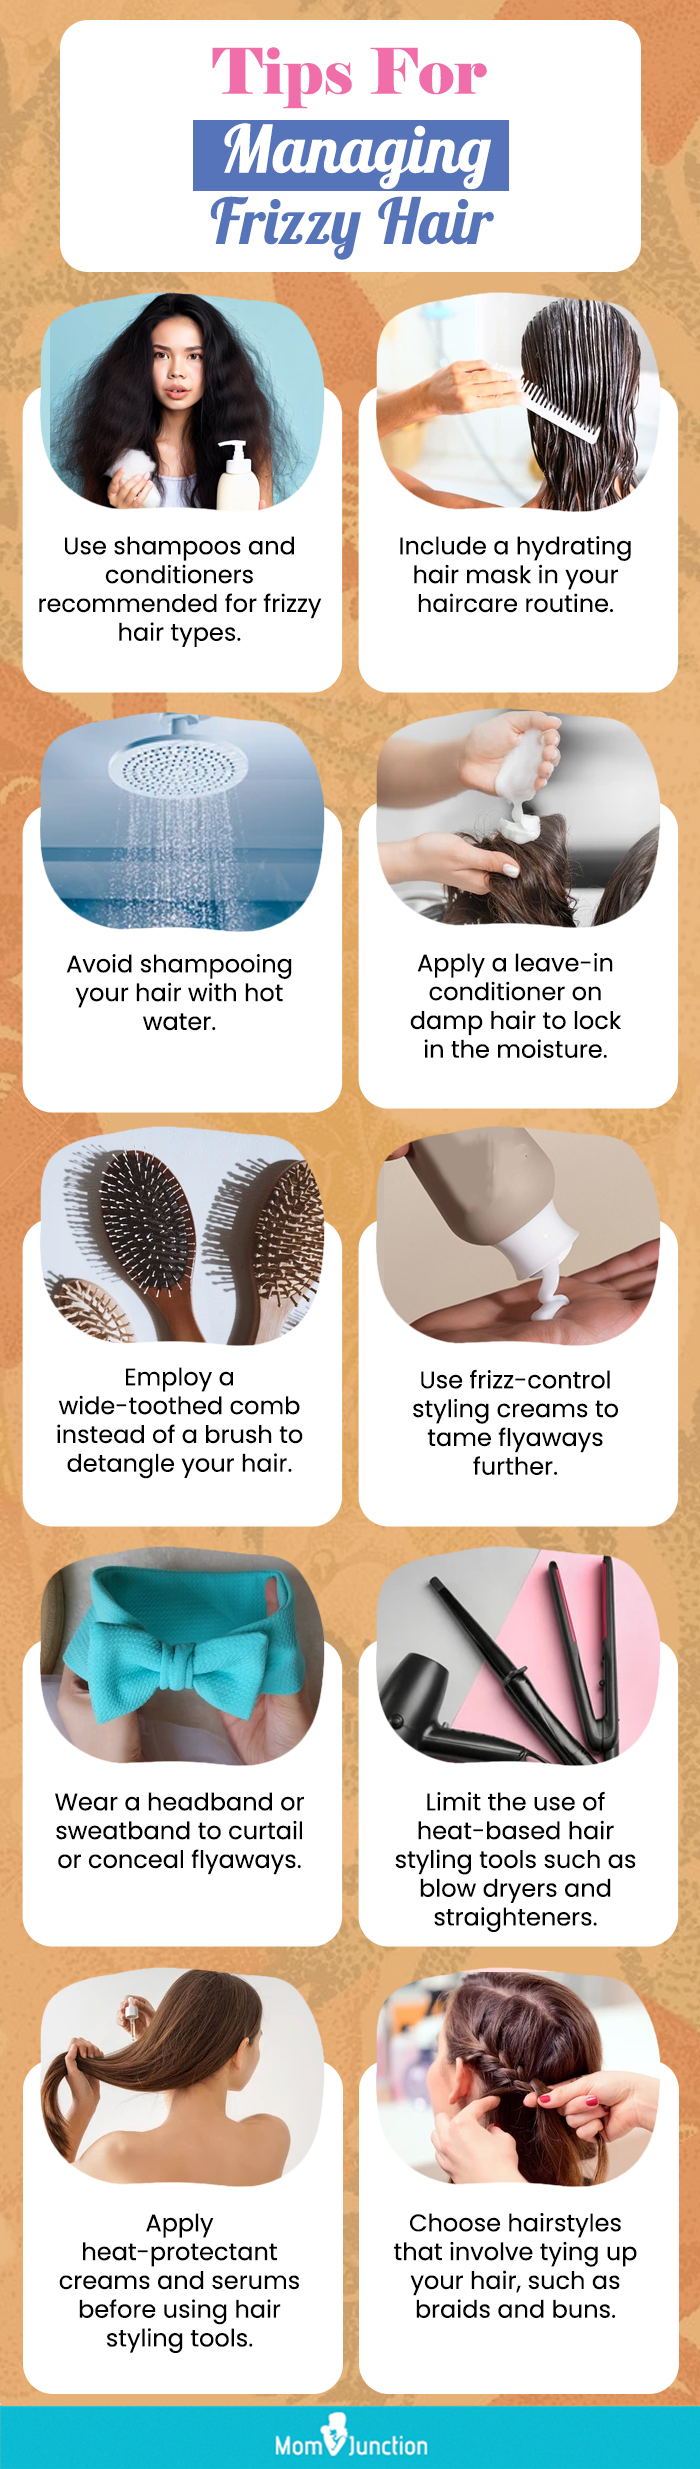 Tips For Managing Frizzy Hair(infographic)